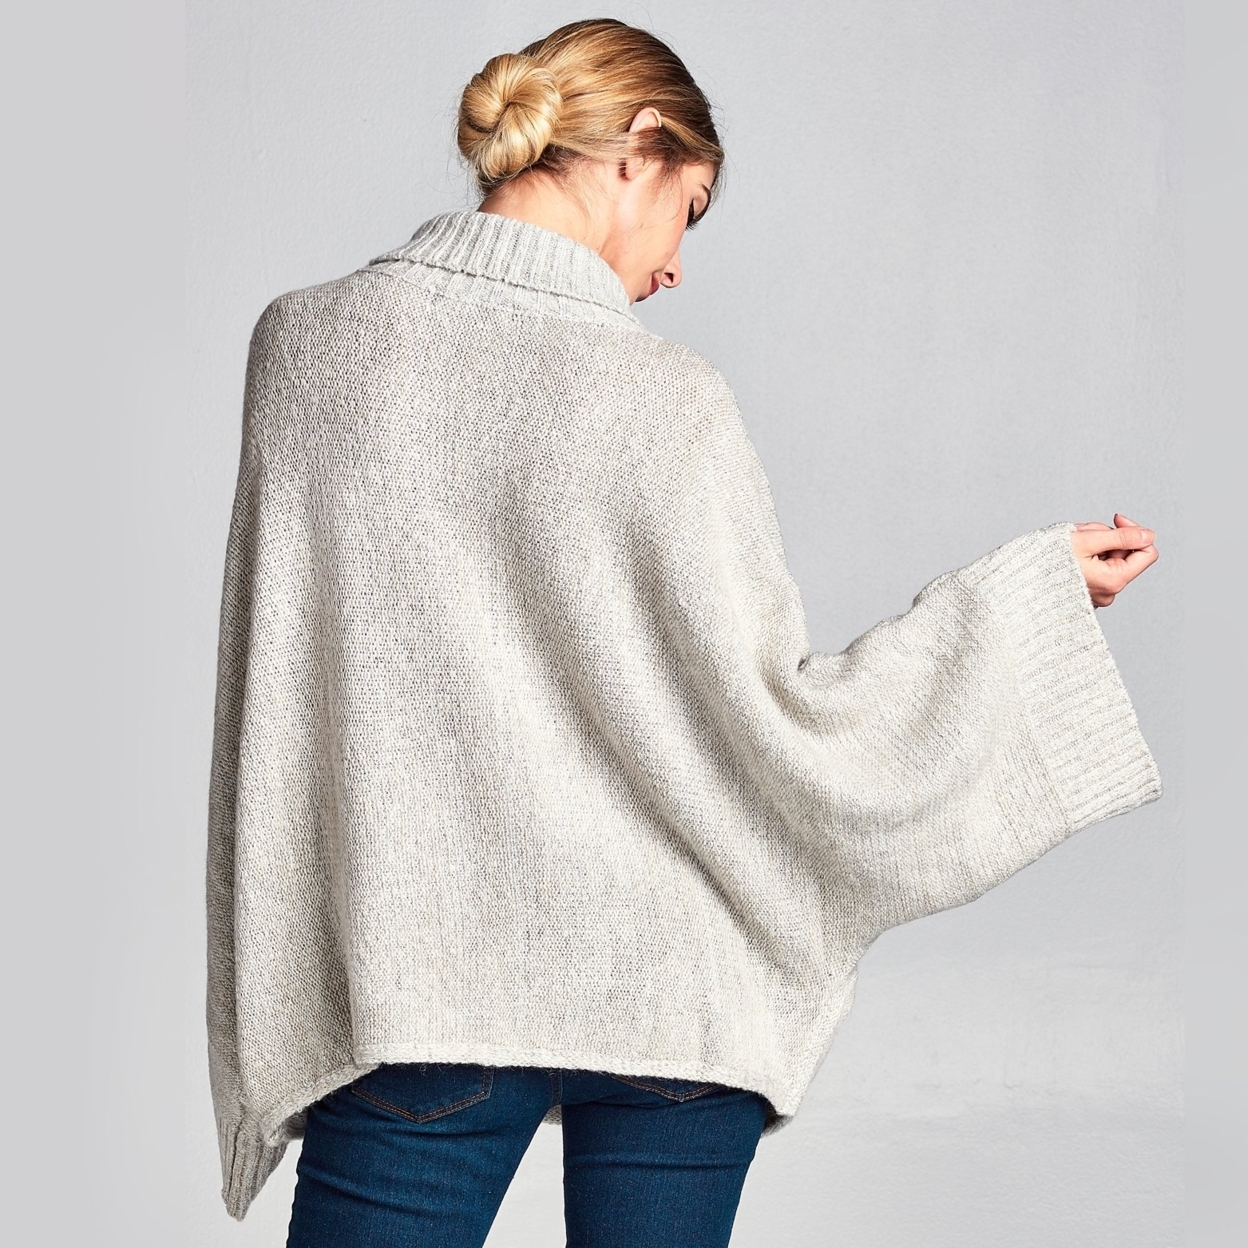 Cowl Neck Bell Sleeve Sweater - Heather Sand, S/m (2-6)